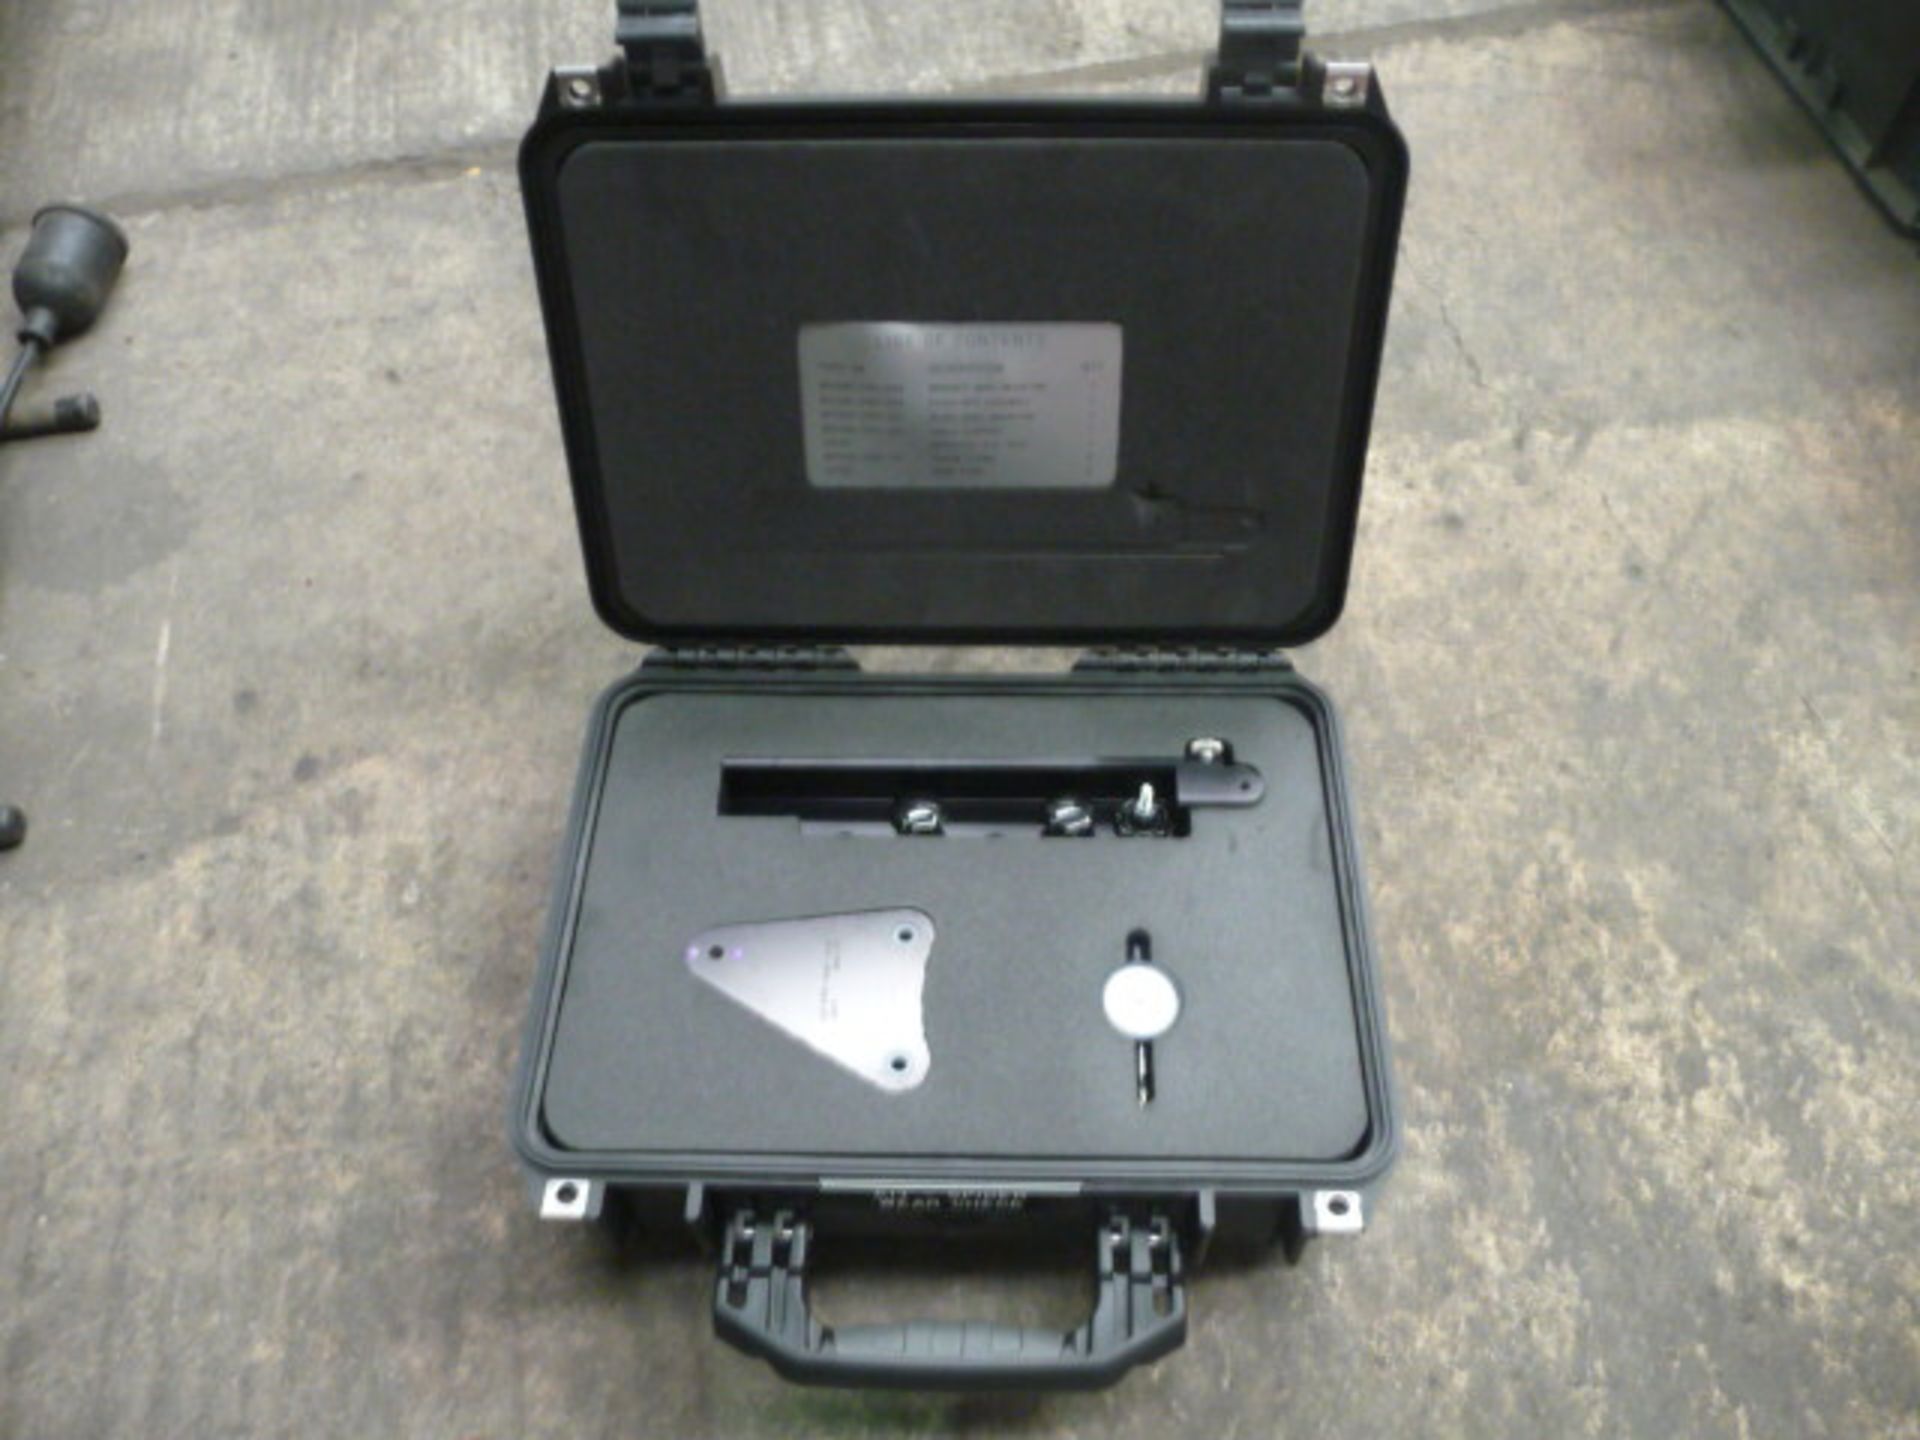 Heavy Duty Peli Case 1450 containing a Spider Wear Check Kit - Image 5 of 7